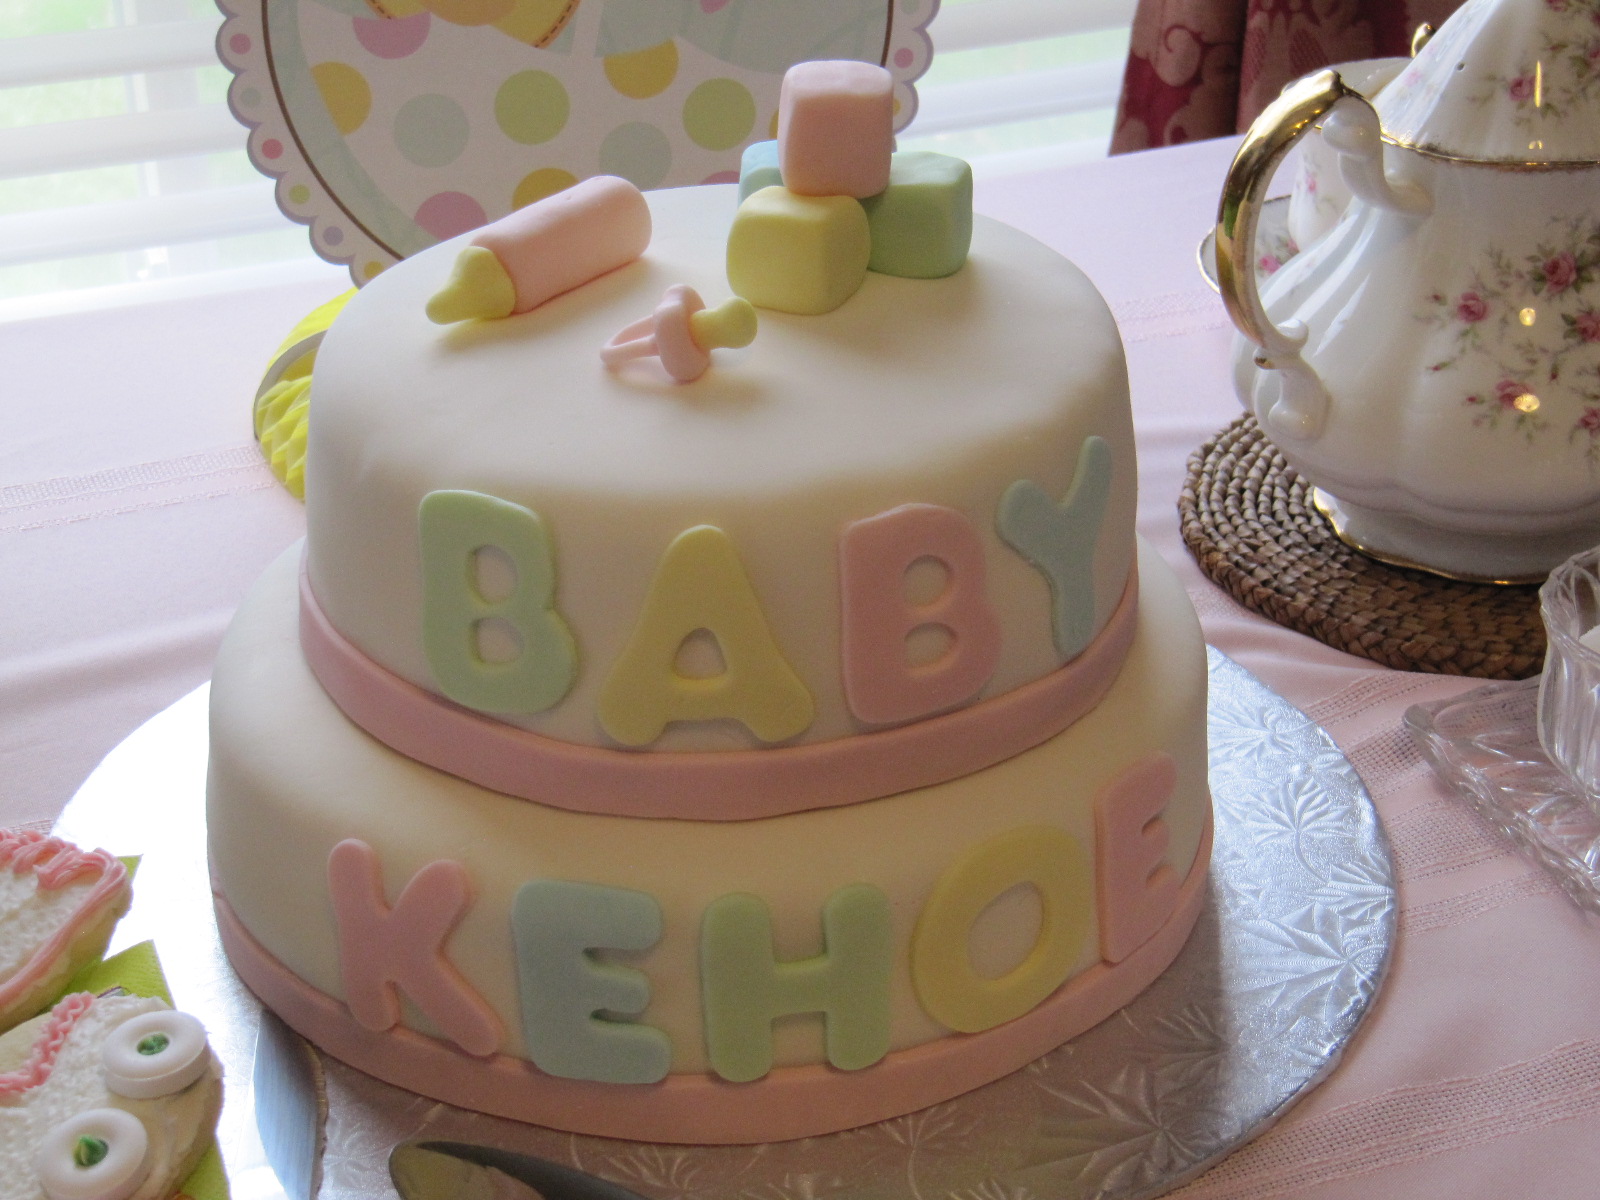 Gender Neutral Baby Shower Sheet Cakes Now the baby shower cake!